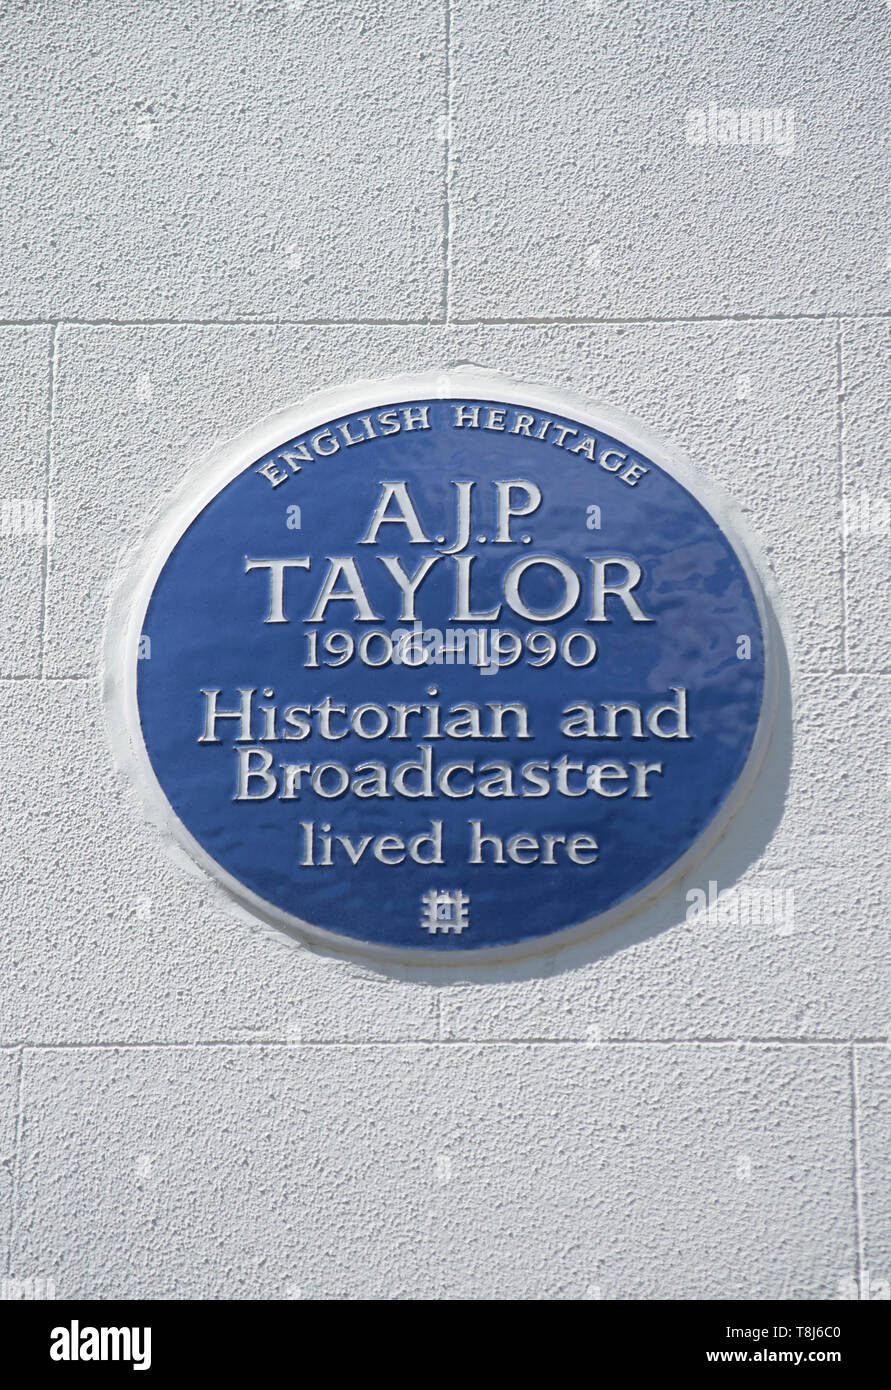 english heritage blue plaque marking a home of historian and broadcaster ajp taylor, primrose hill, london, england Stock Photo